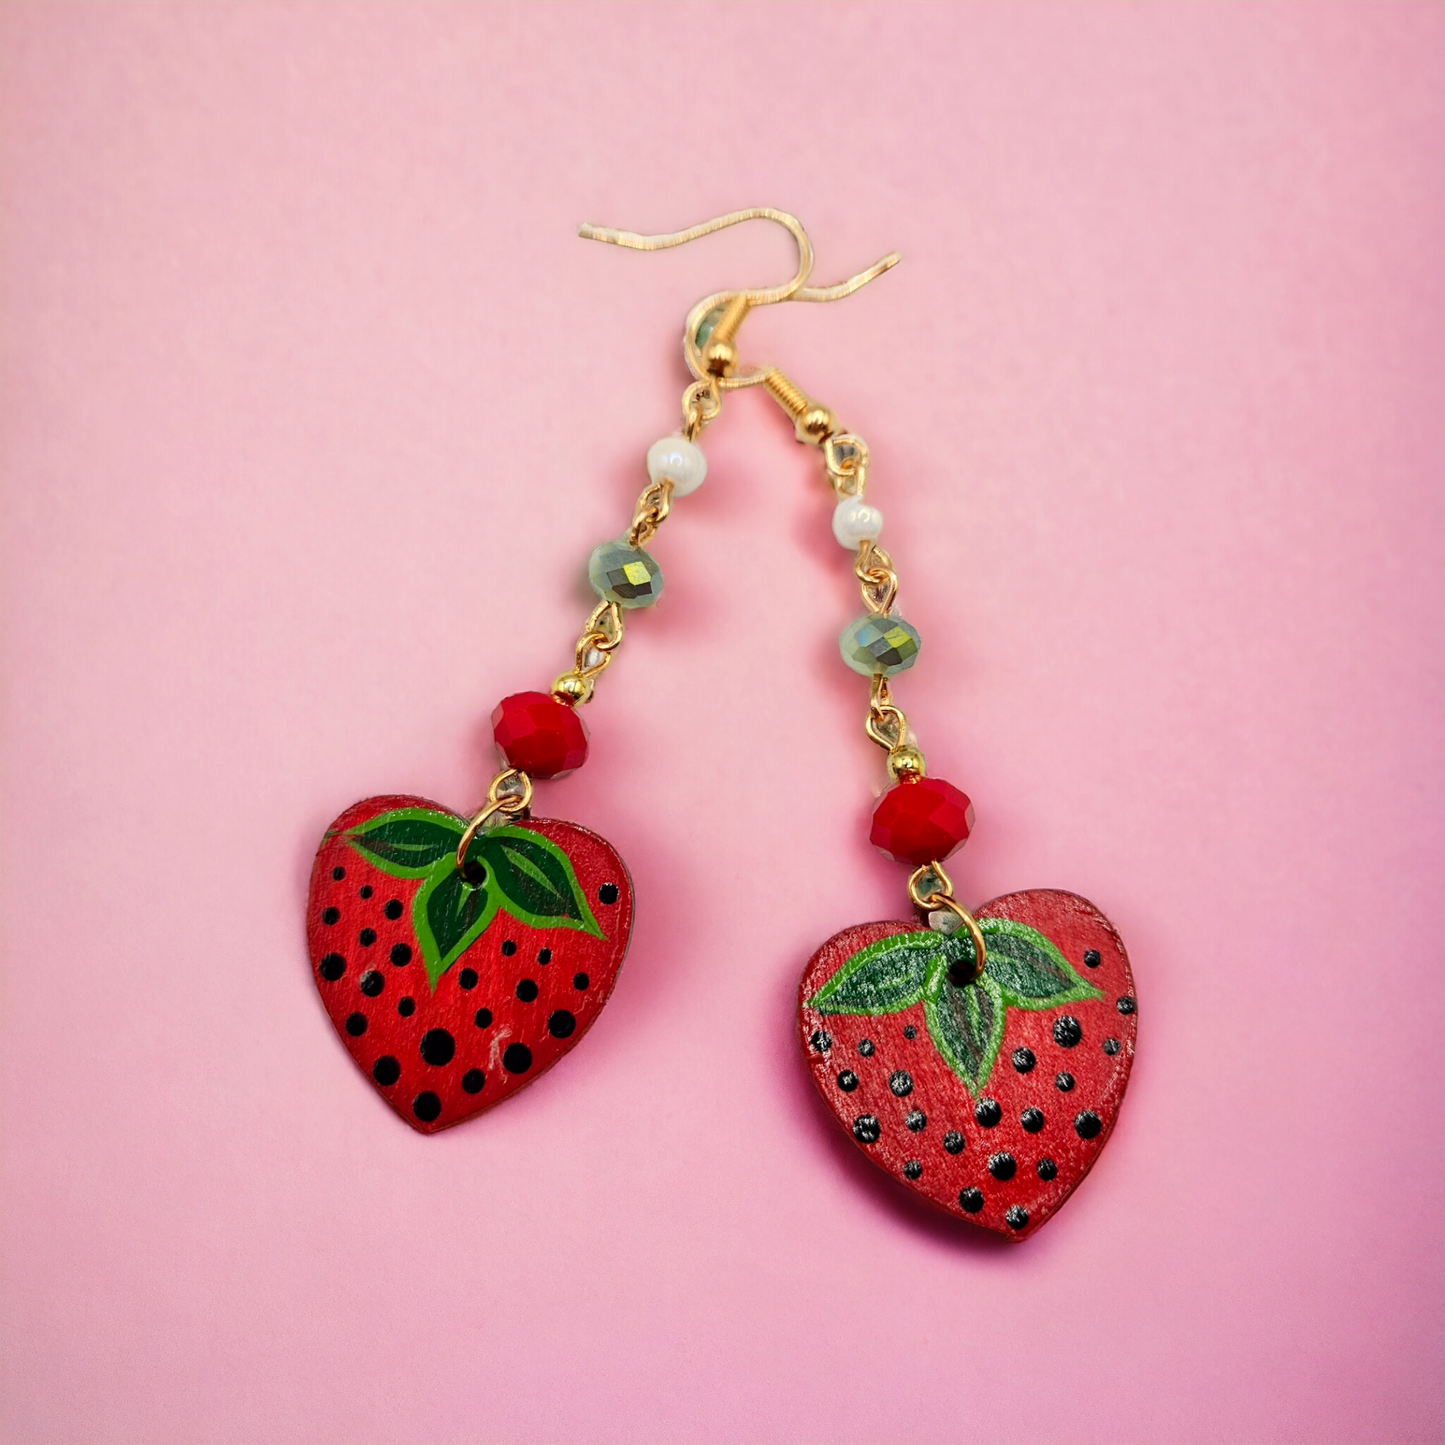 Strawberry Painted Wooden Earrings